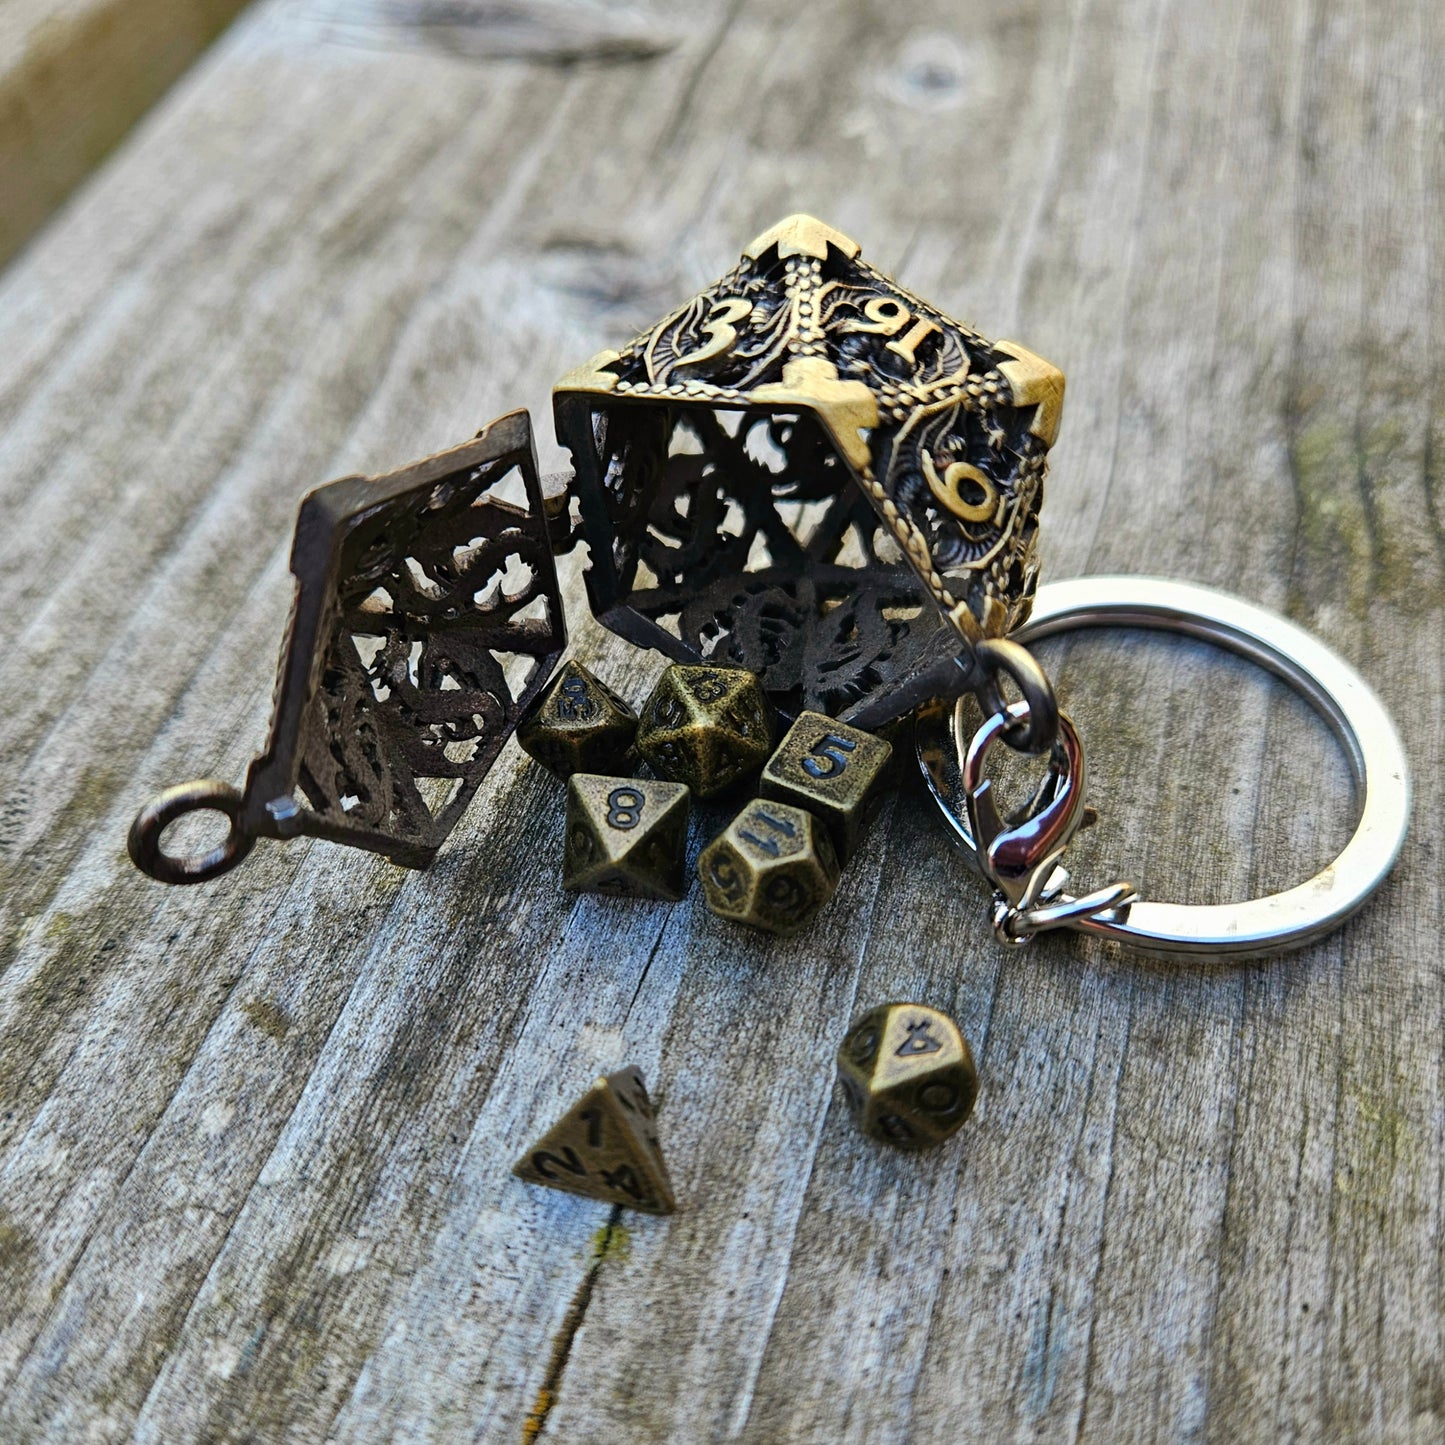 Metal d20 keychain with matching dice